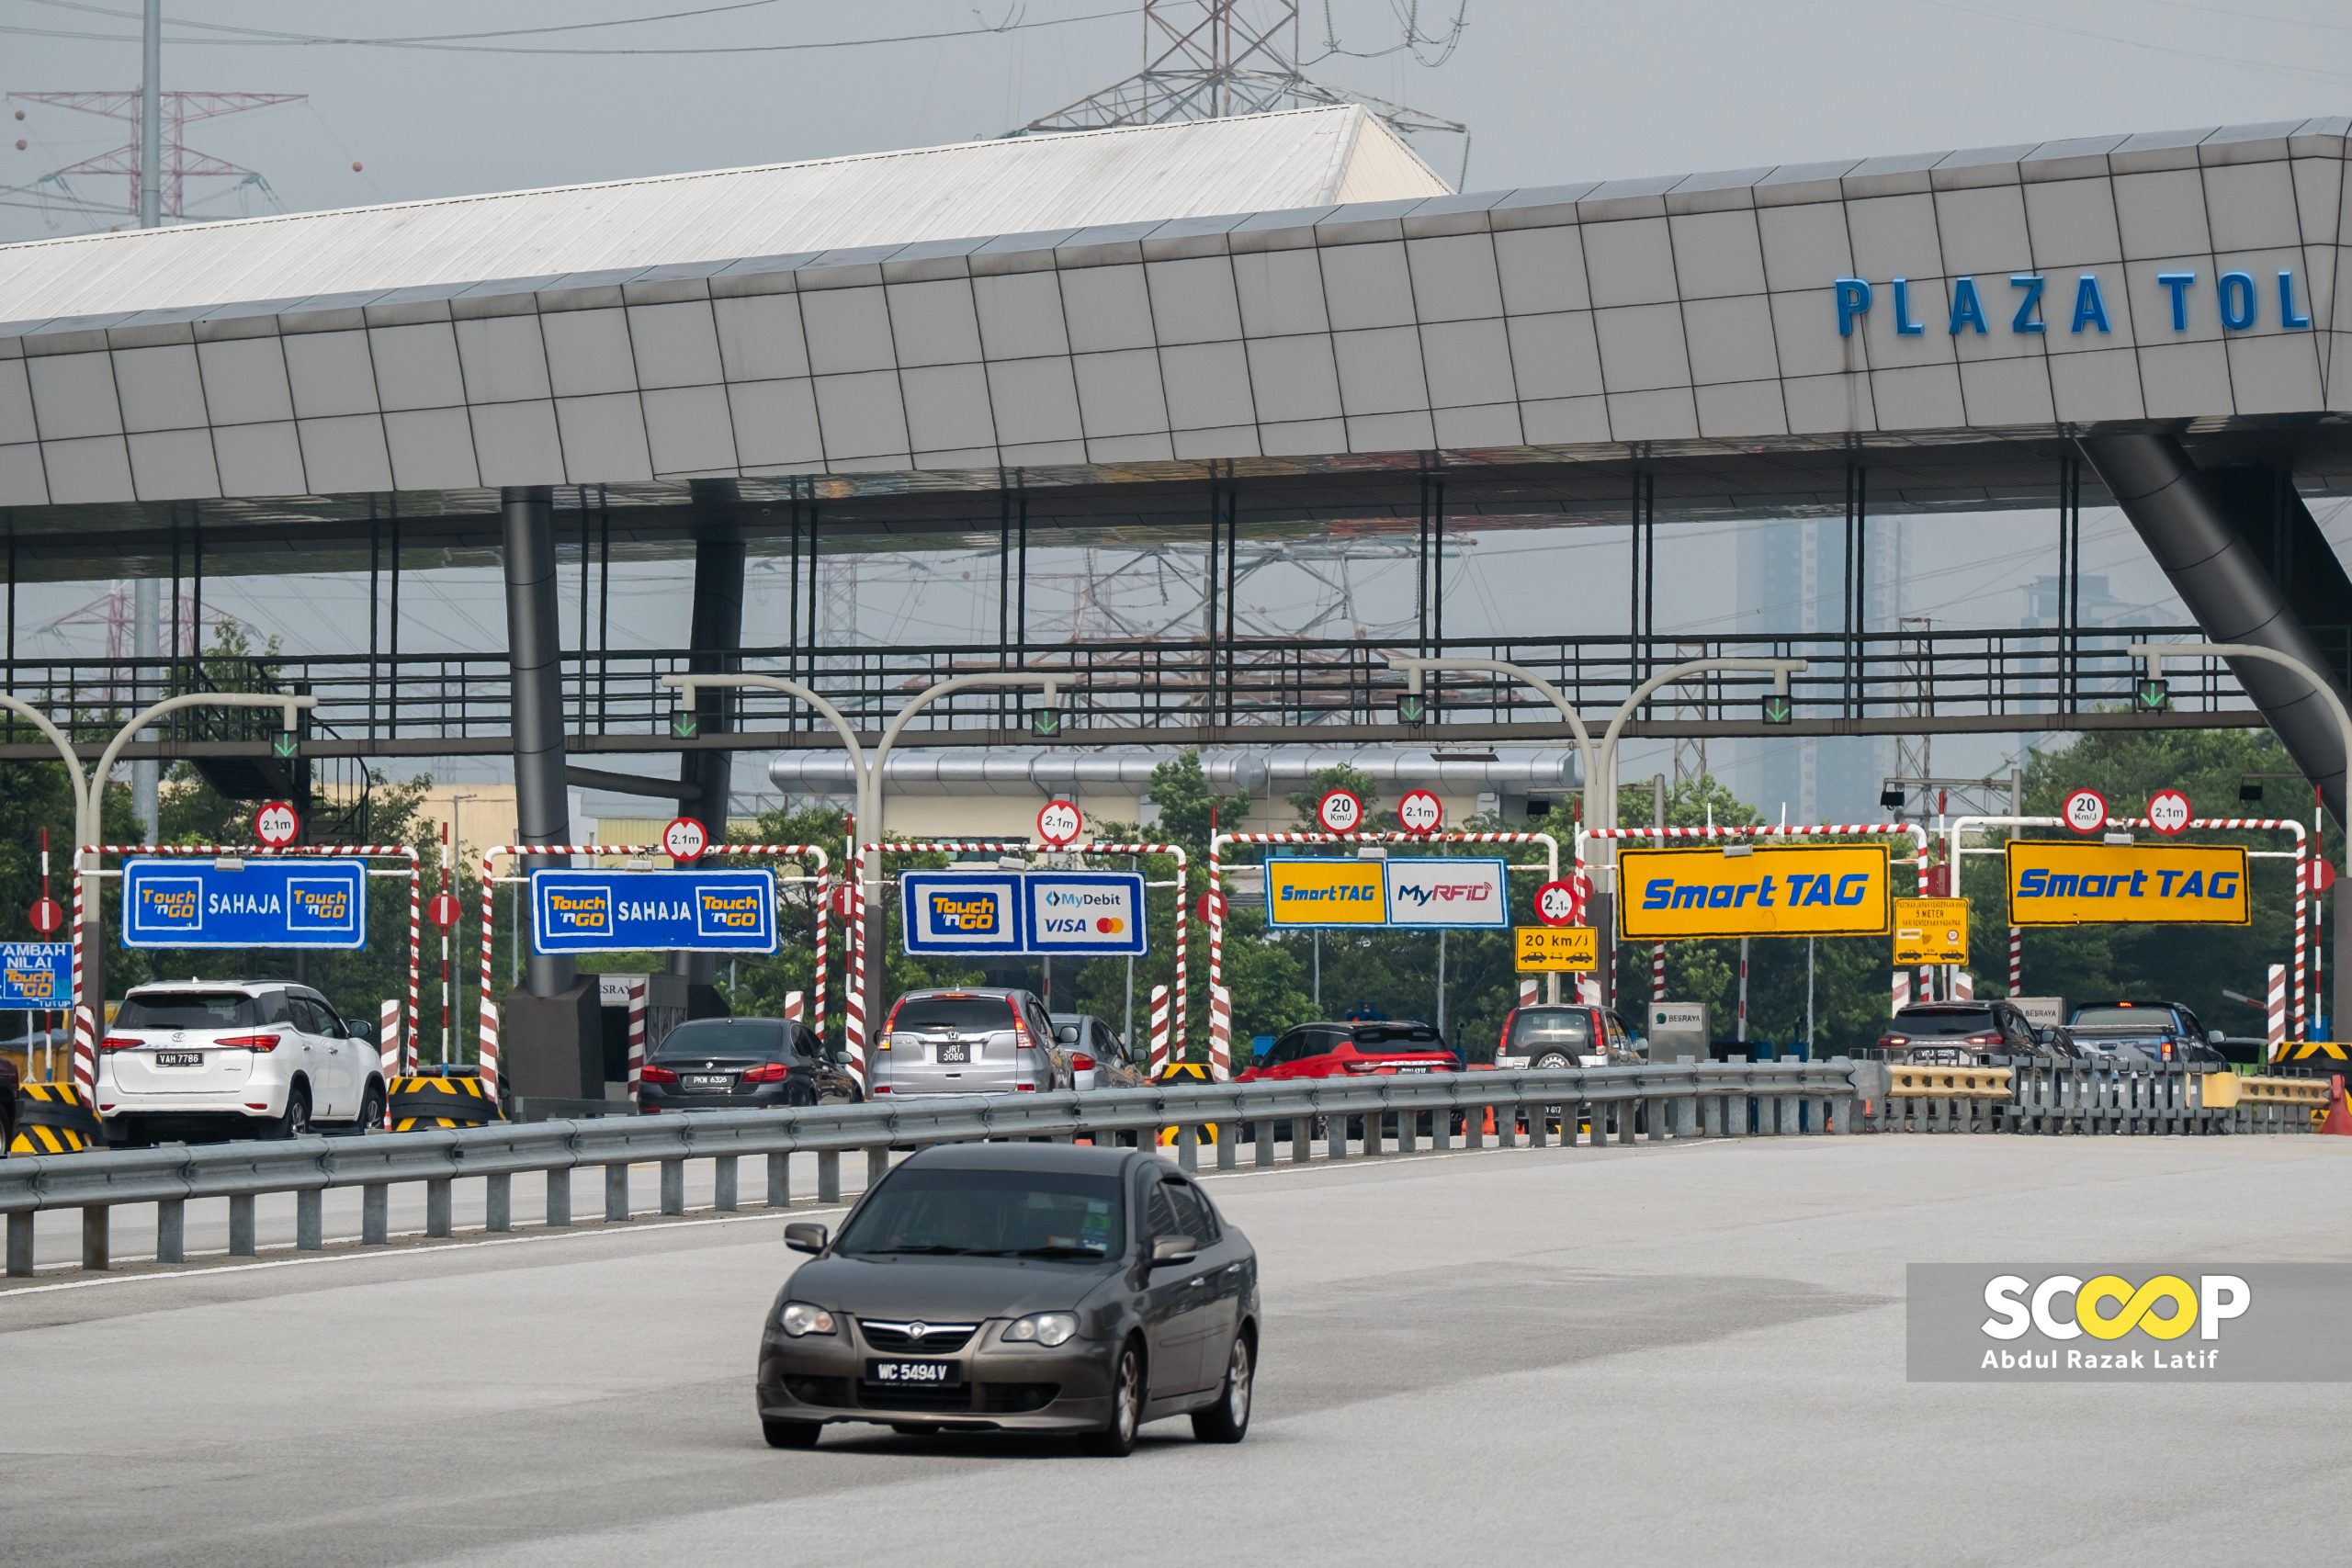 Drivers must still ‘touch’ or ‘wave’ card, RFID for toll-free Deepavali travel: PLUS